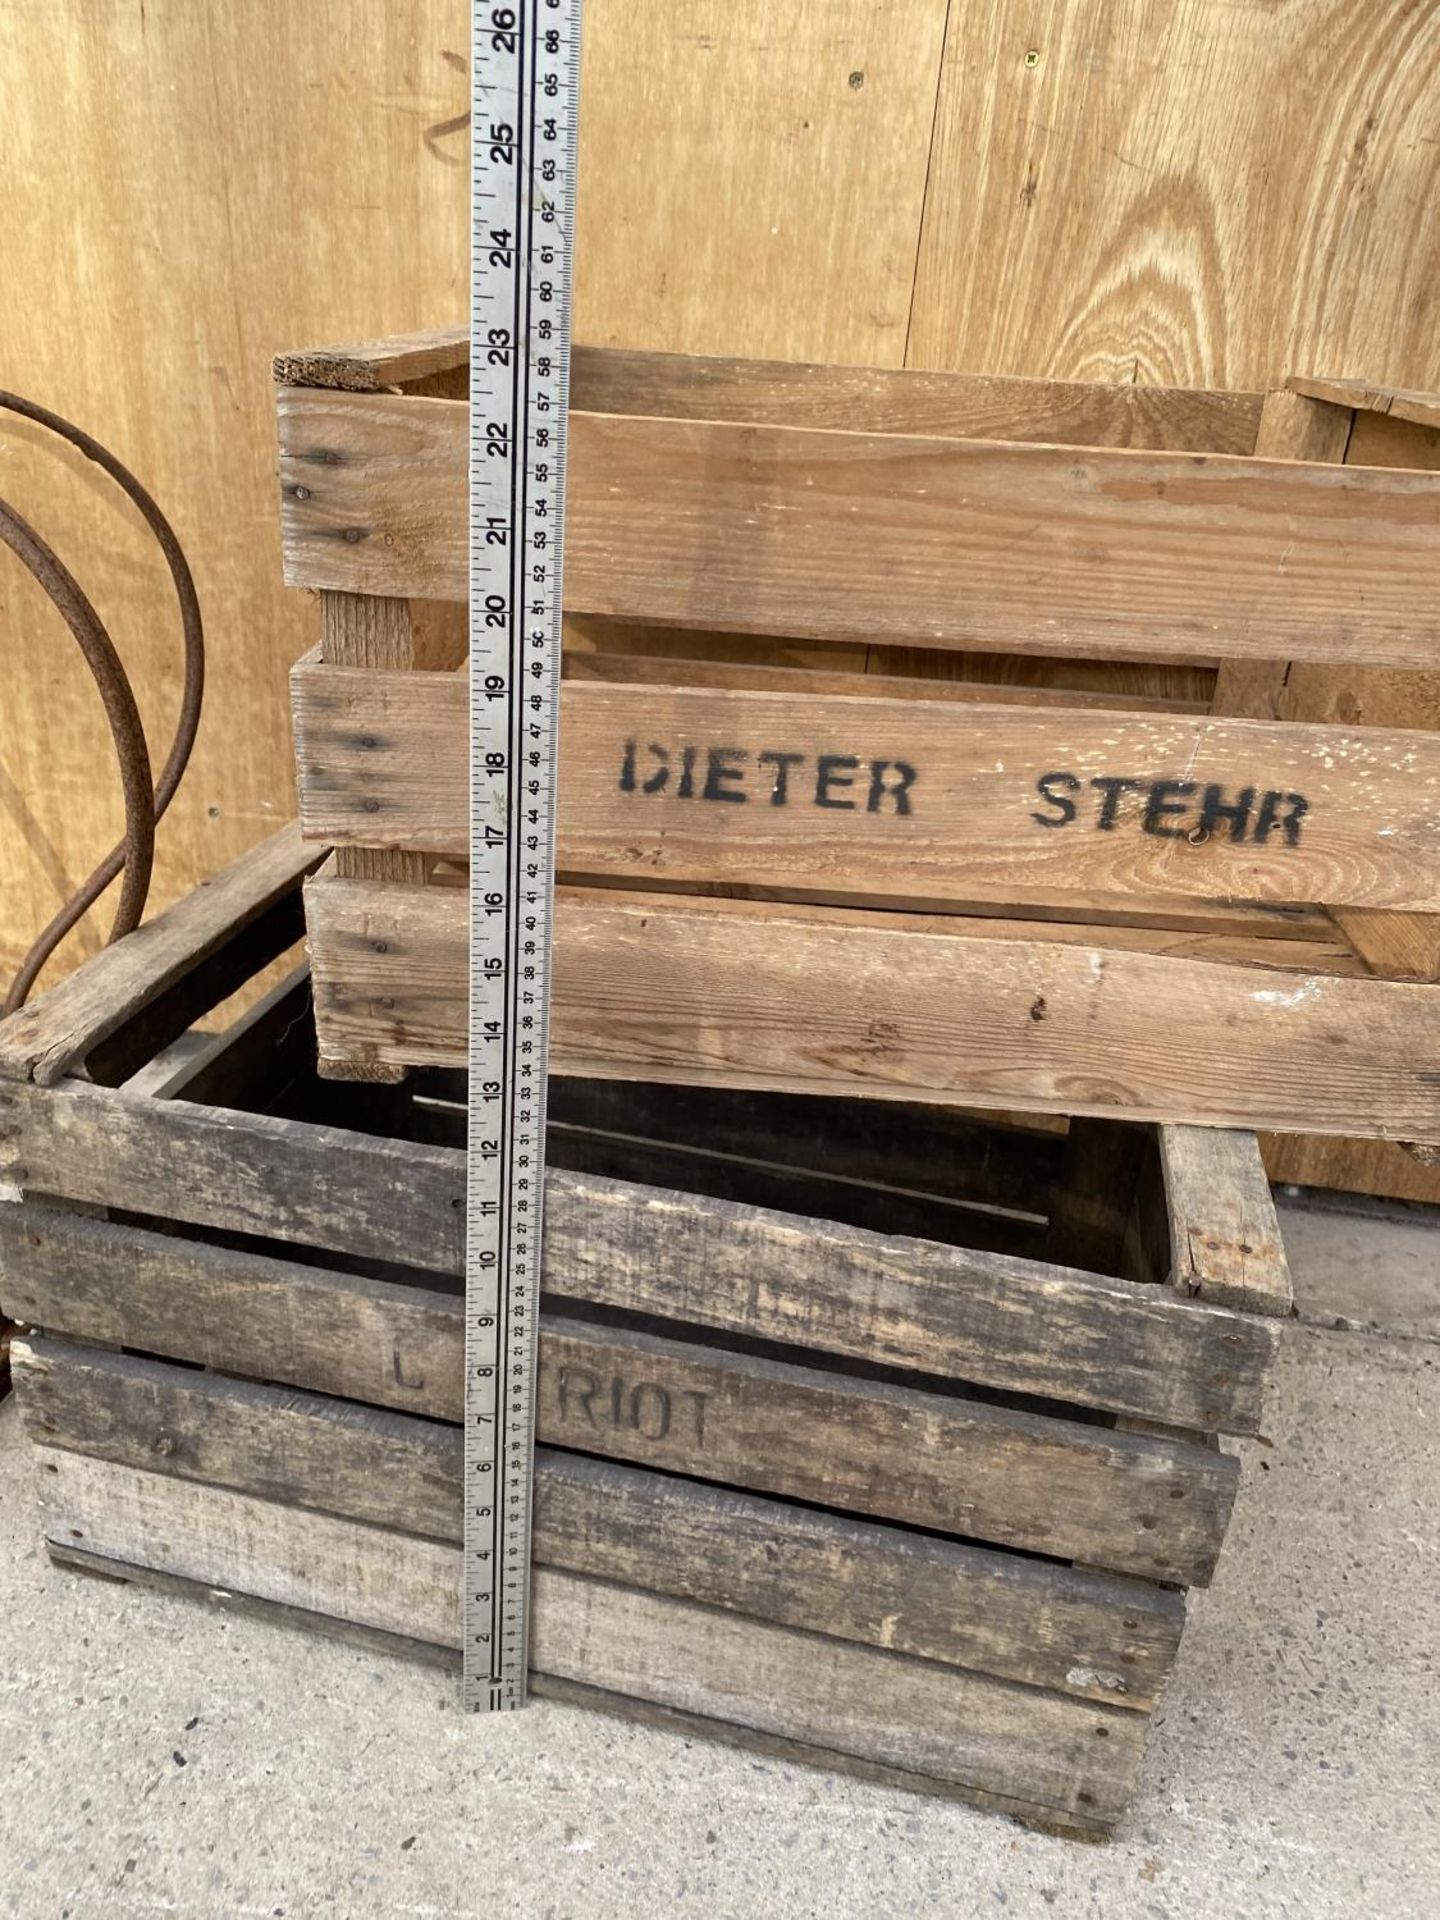 TWO VINTAGE WOODEN MONOGRAMED CRATES - Image 3 of 4